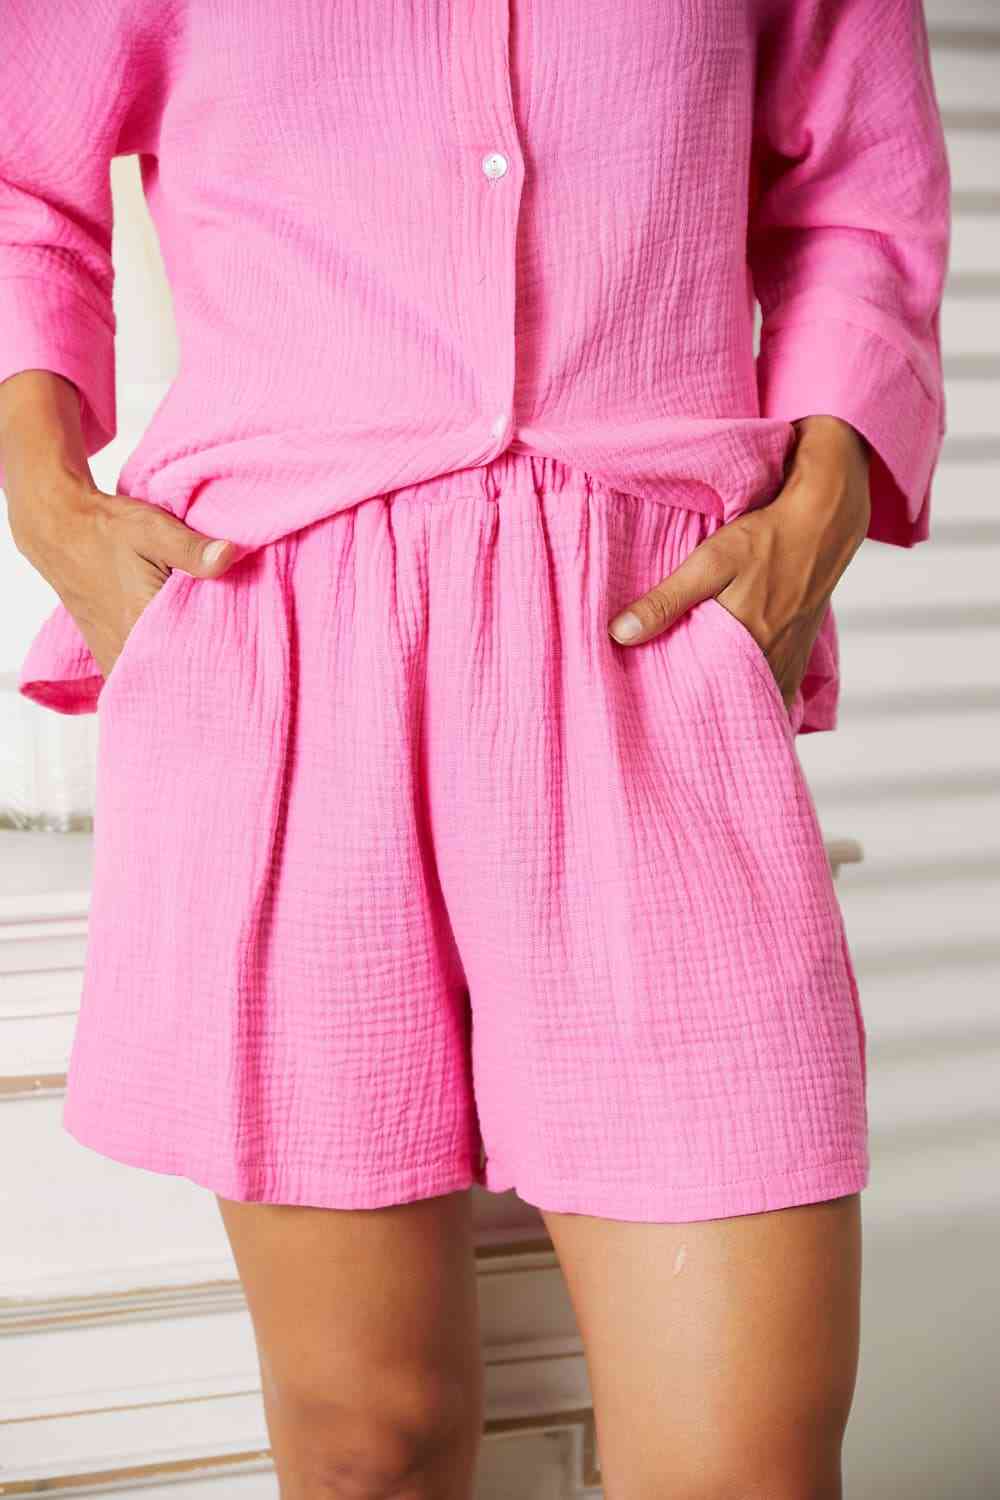 Double Take  Fuchsia Pink Textured Shirt and Elastic Waist Shorts with Pockets